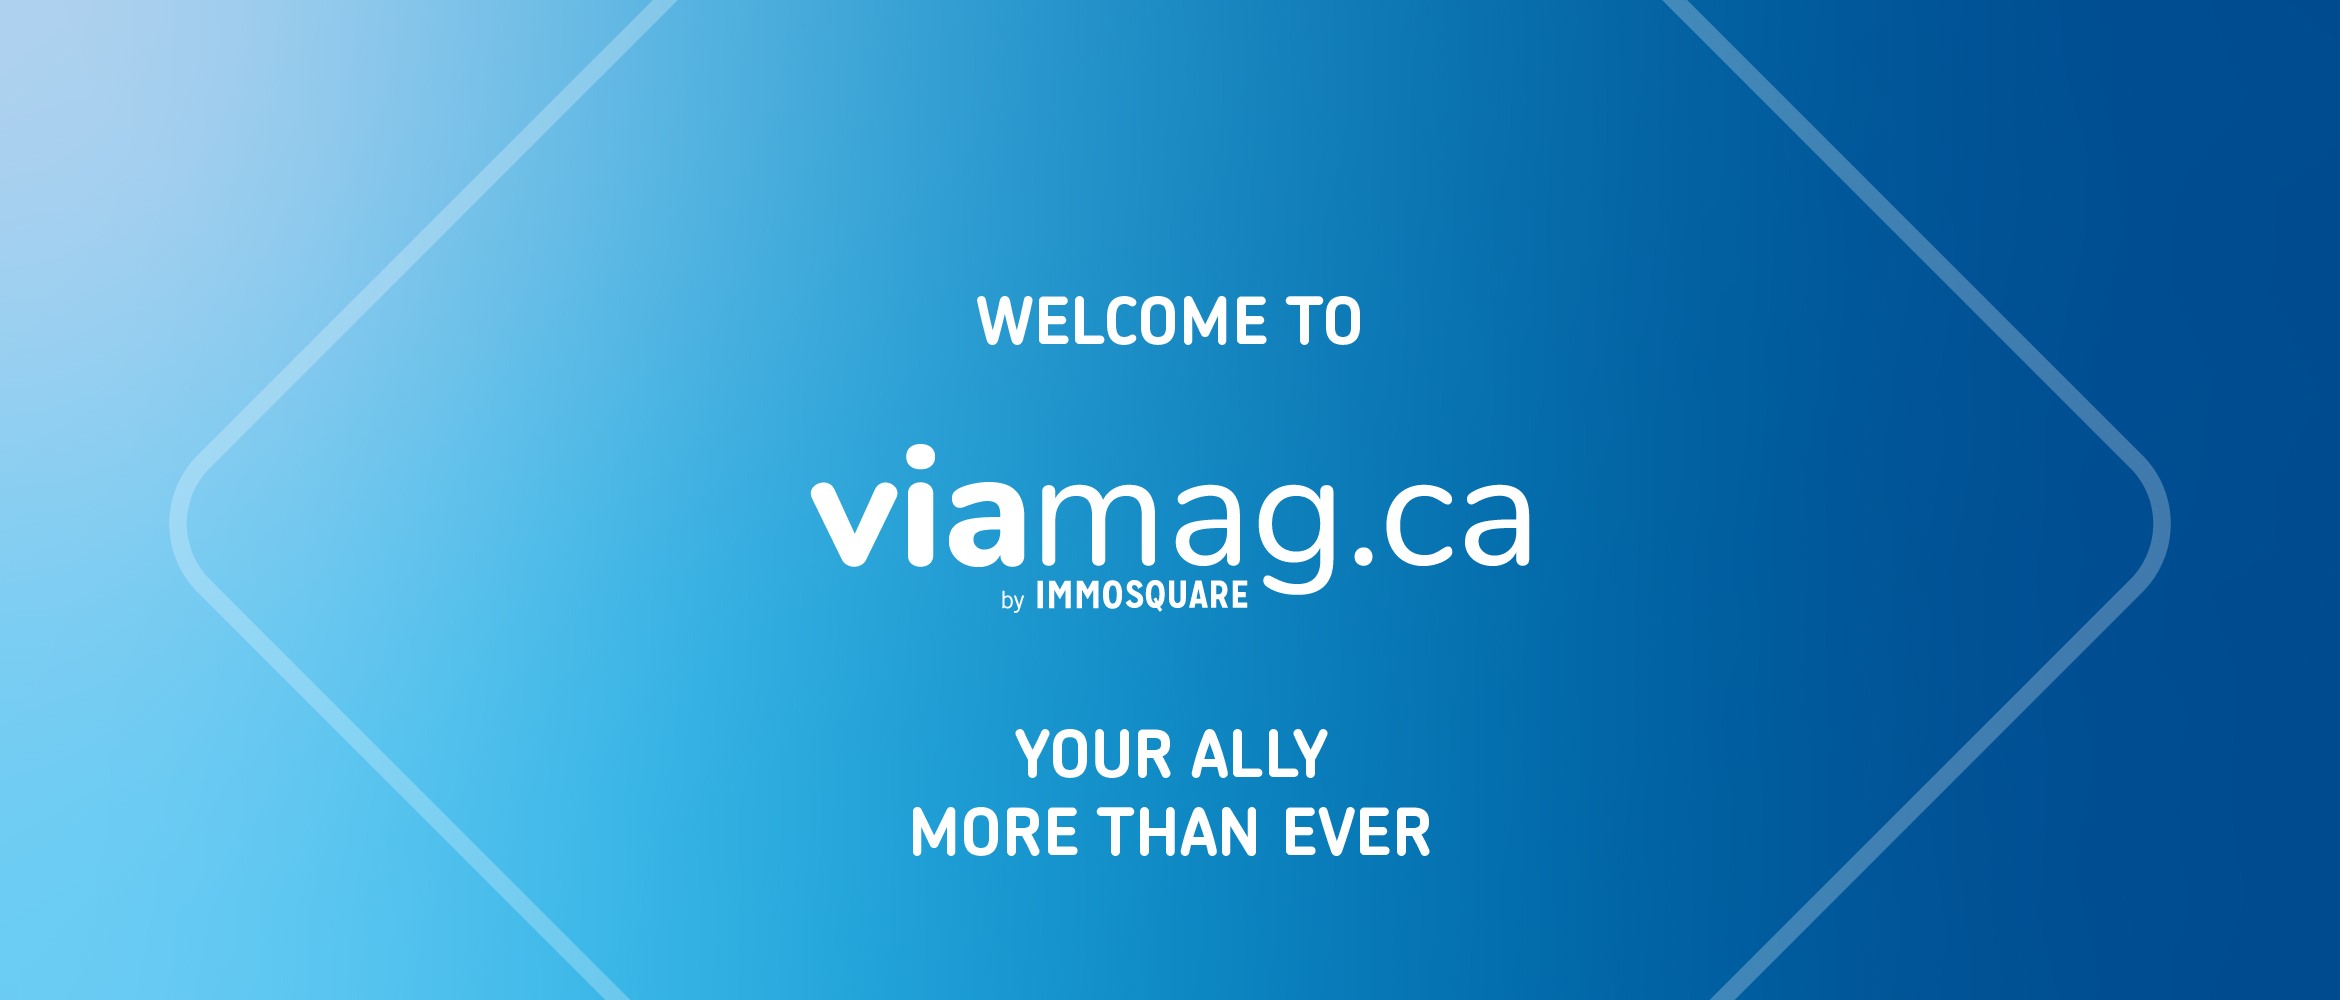 Welcome to Viamag